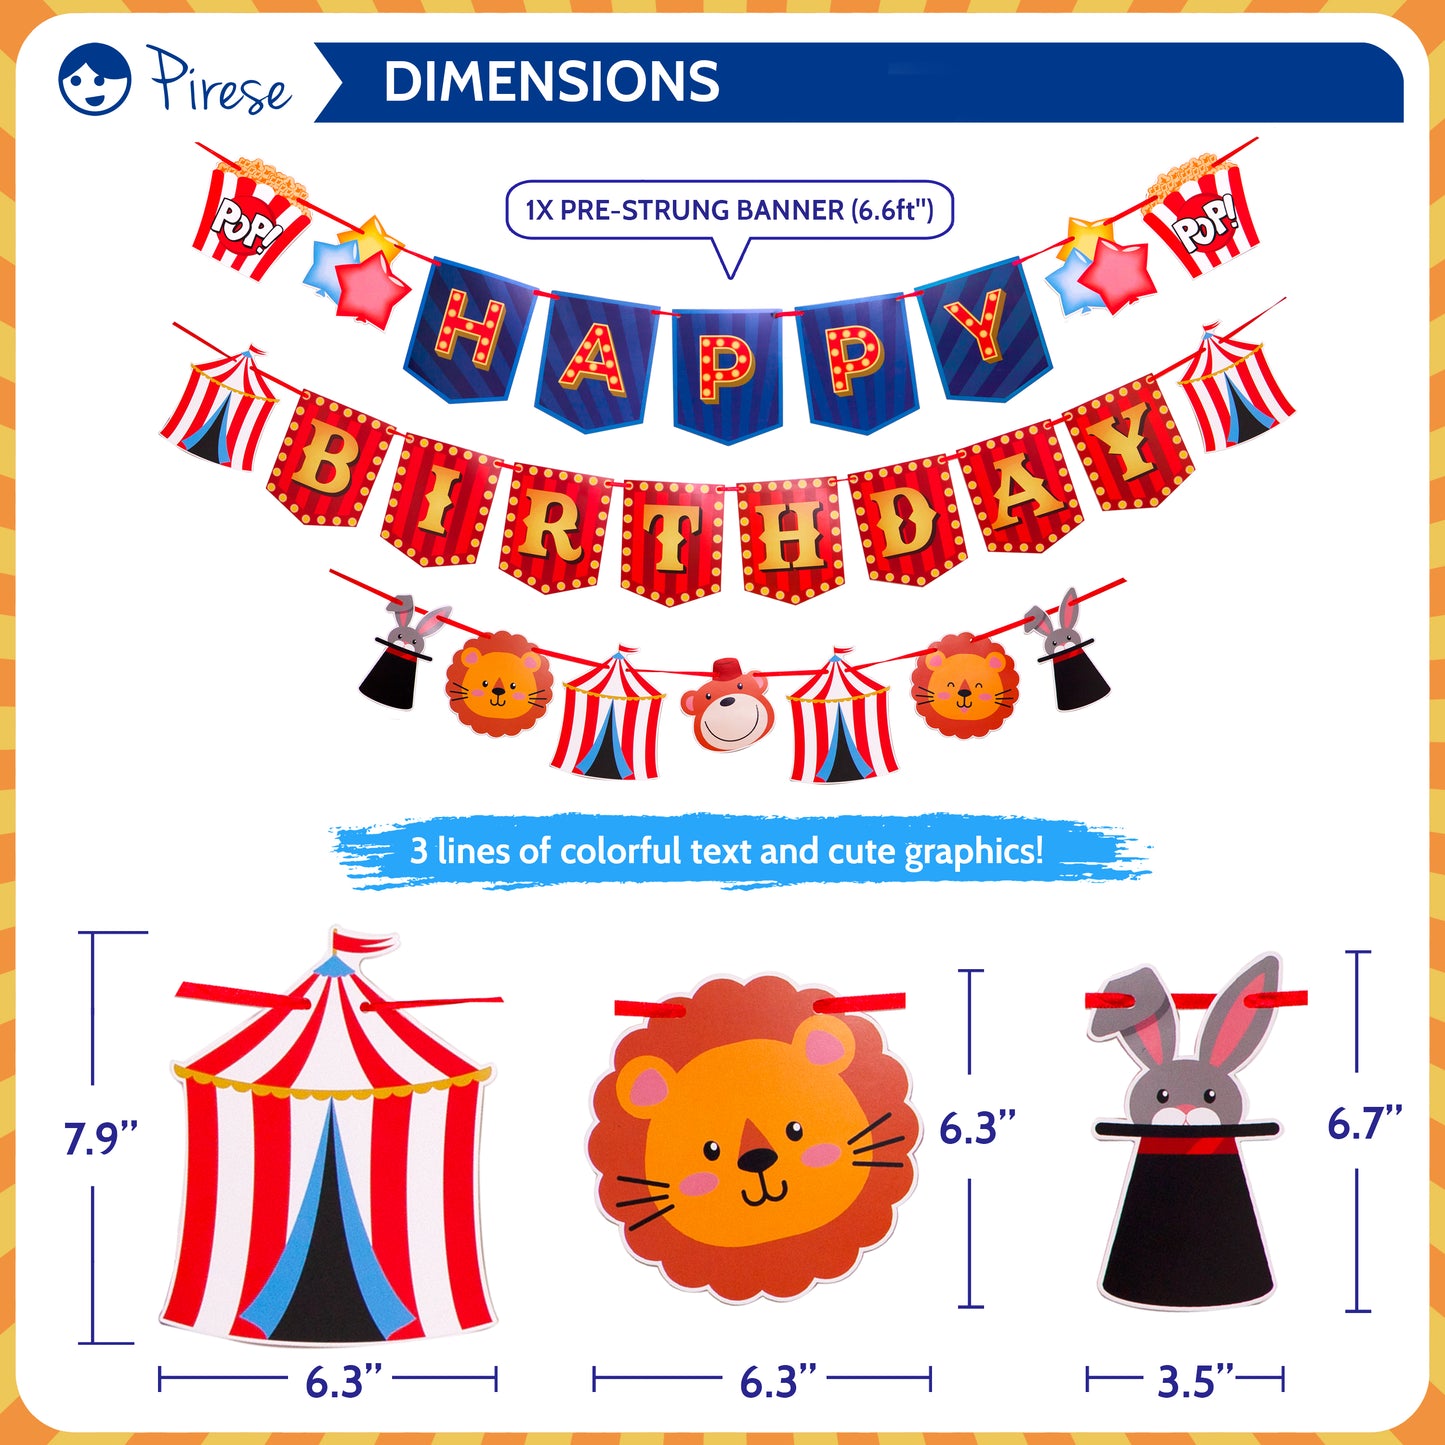 Pirese Carnival Theme Party Decorations, Circus Party Decorations, Carnival Birthday Party